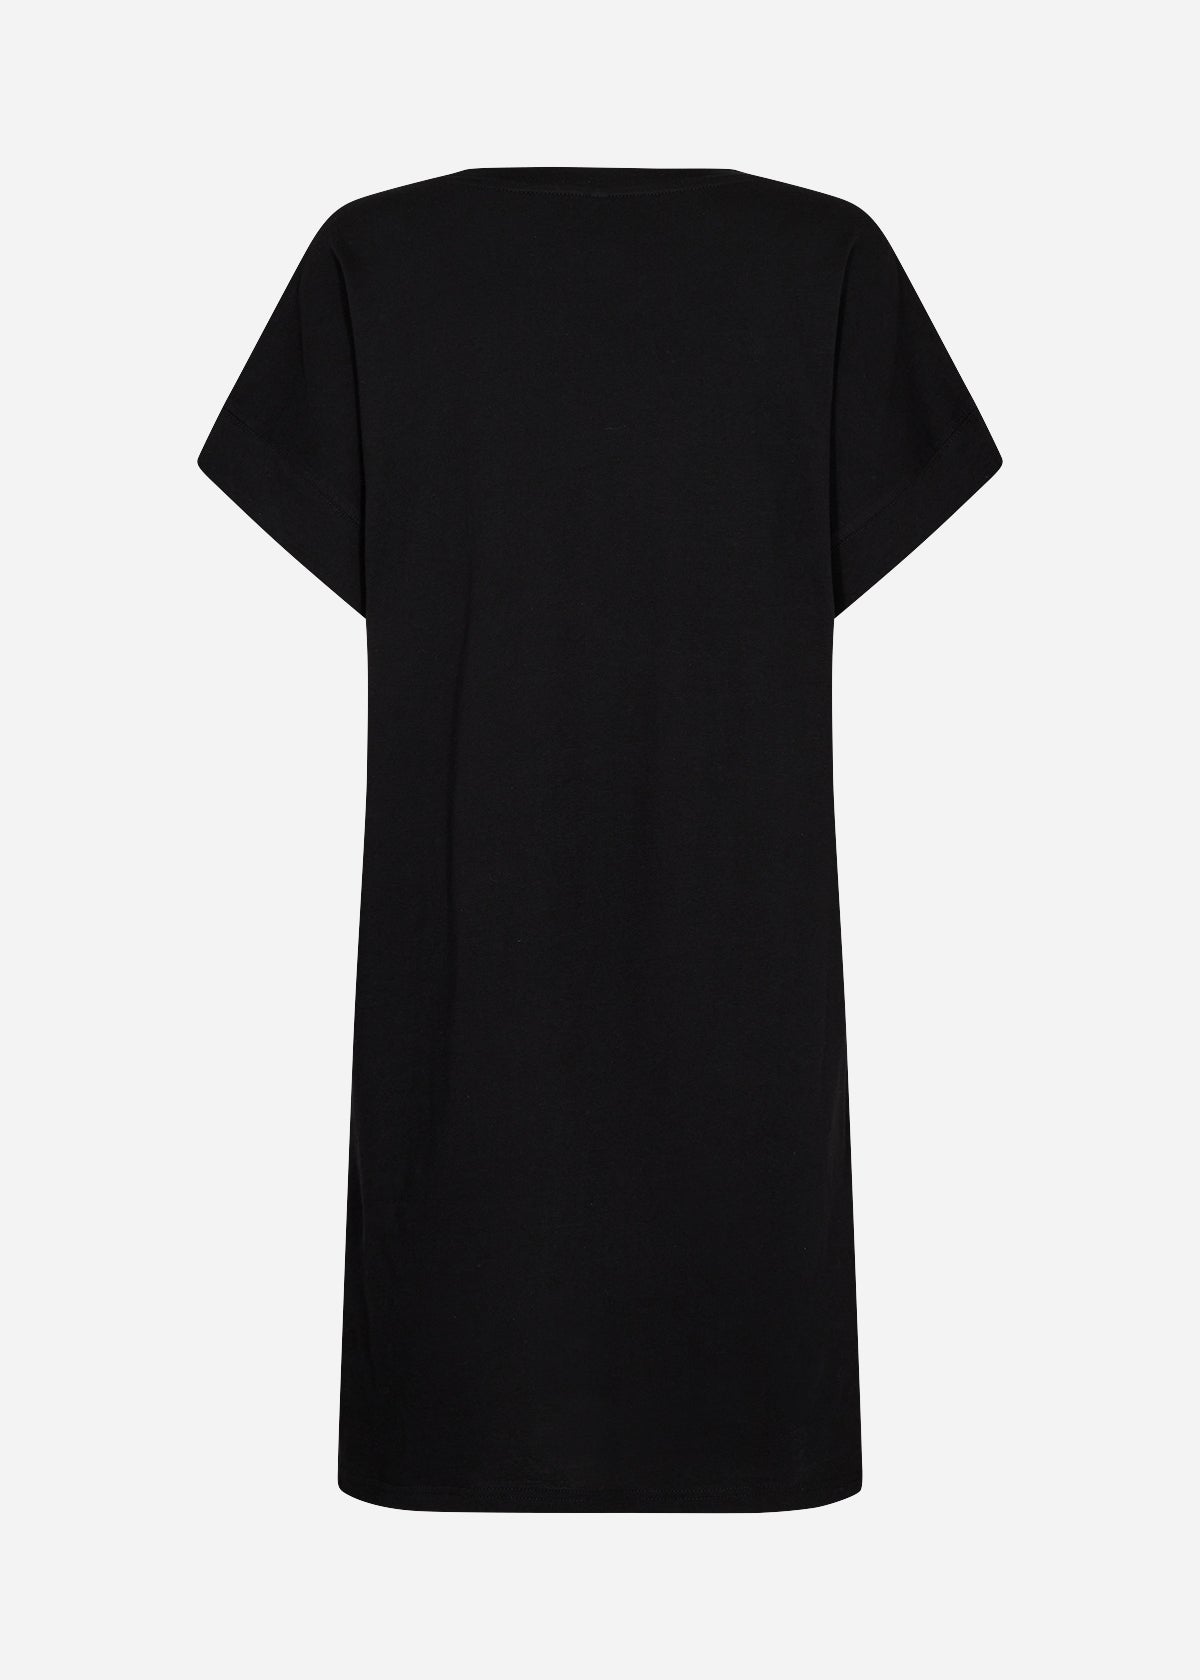 T-shirt dress in Black from Soya Concept